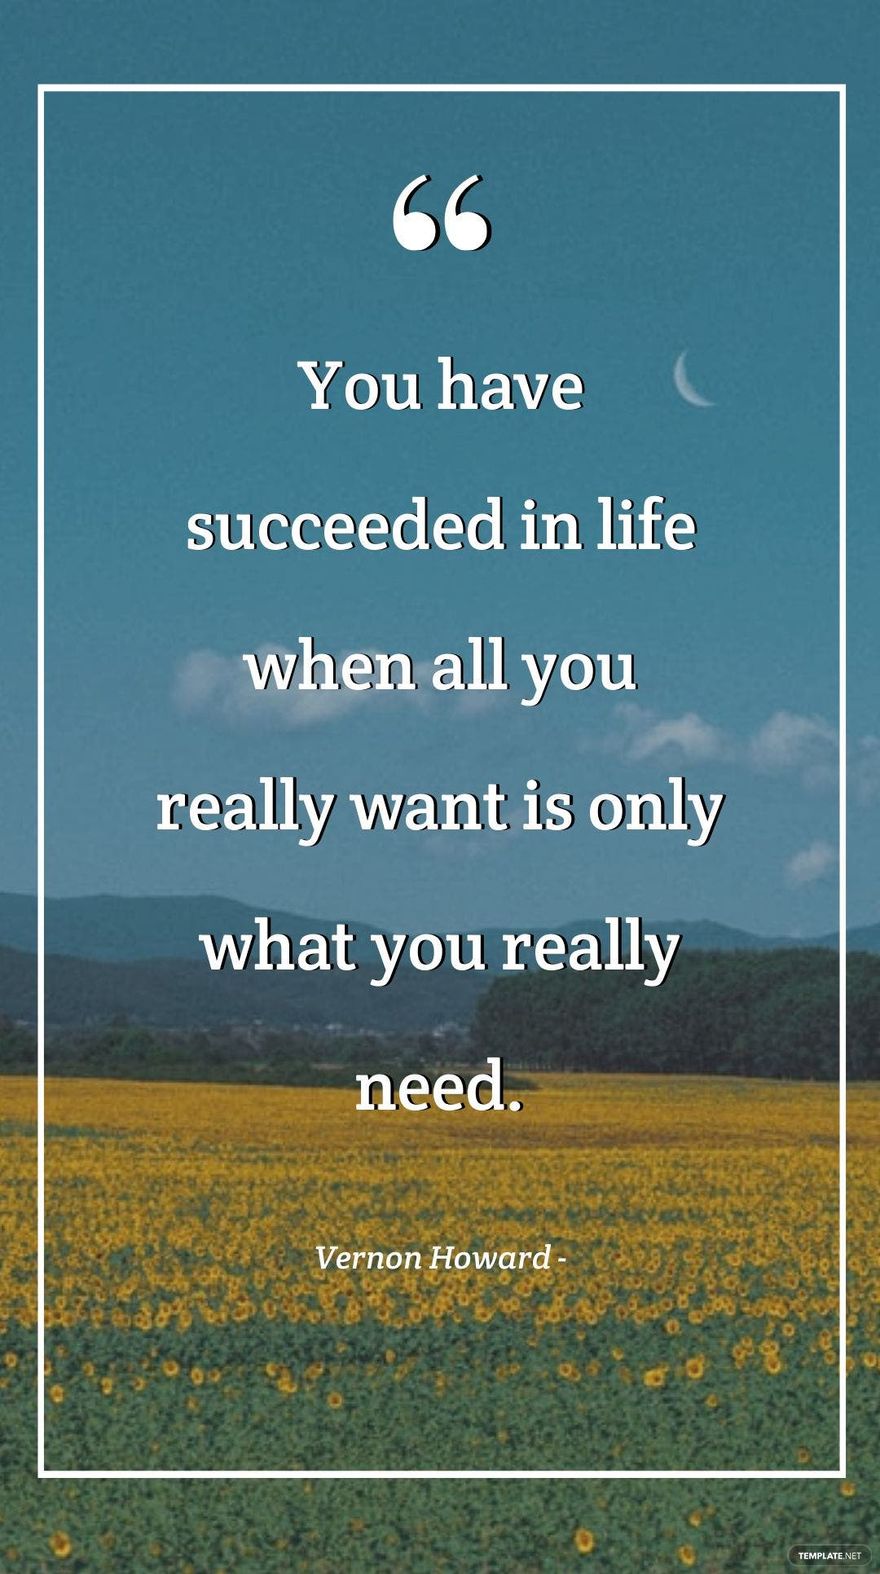 Vernon Howard - You have succeeded in life when all you really want is only what you really need.